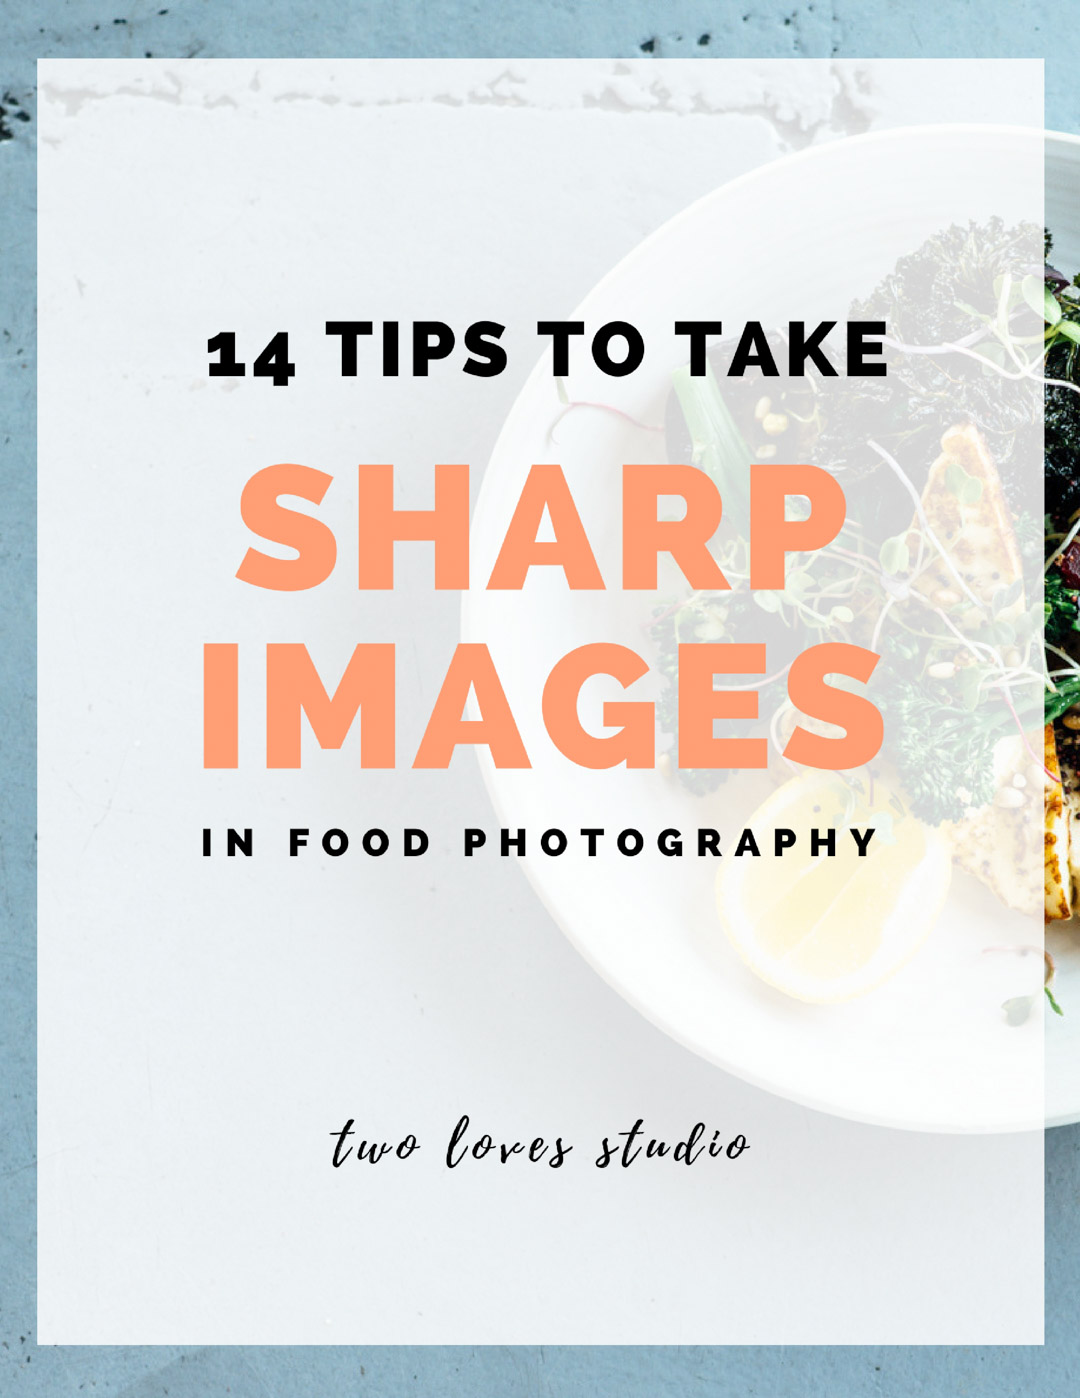 14 Tips to Troubleshooting Tack Sharp Images in Food Photography. Click To Get The FREE Checklist.